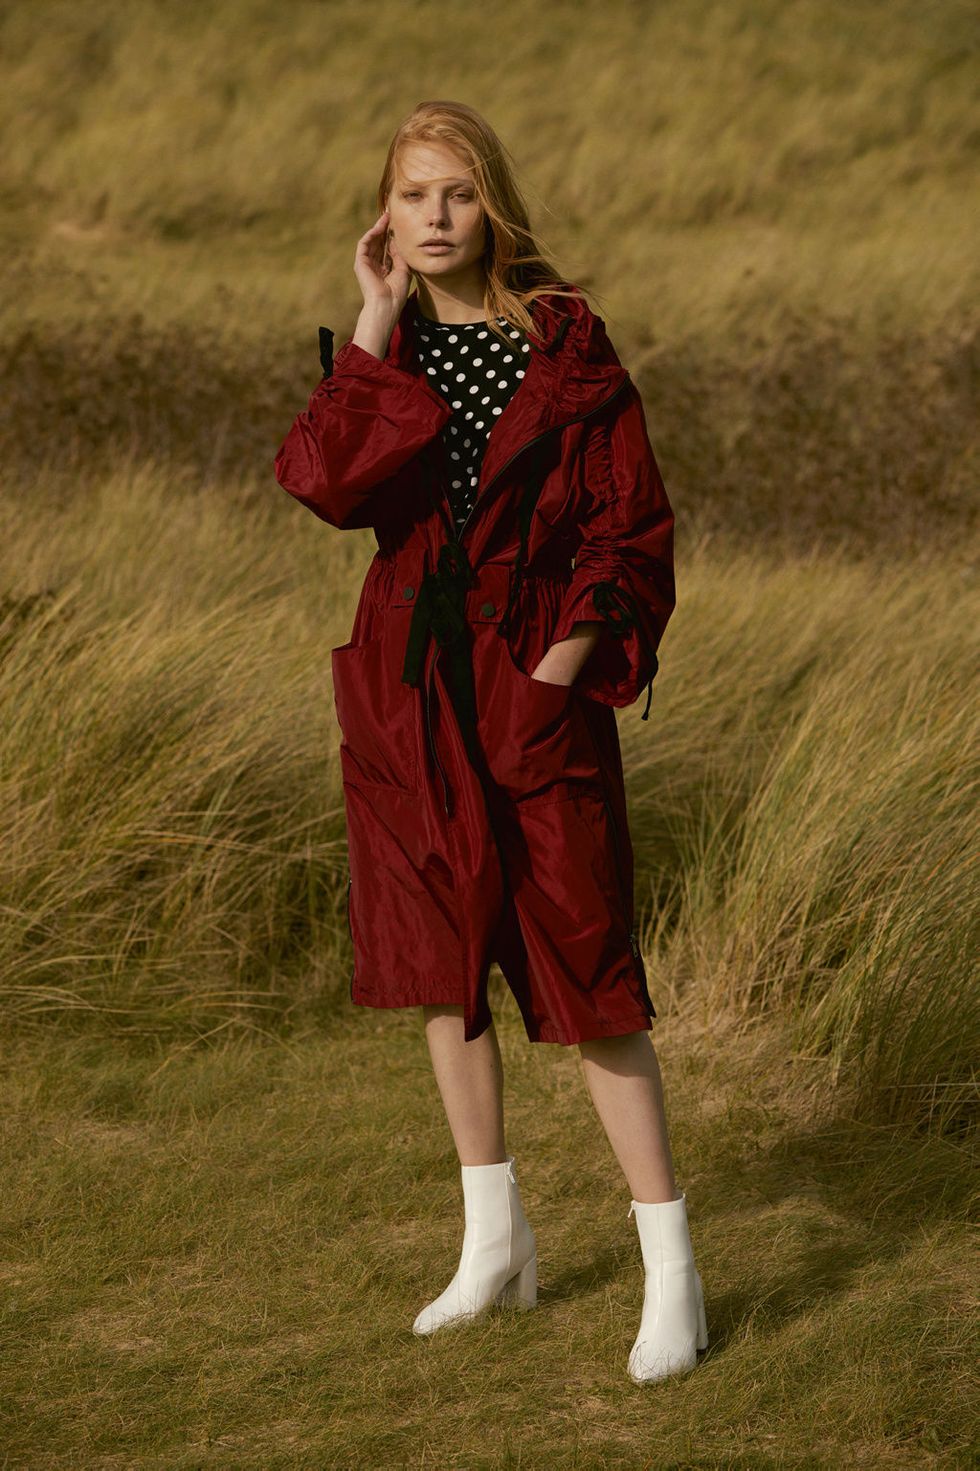 Red, Clothing, Maroon, Outerwear, Grass, Fun, Photography, Dress, Long hair, Pattern, 